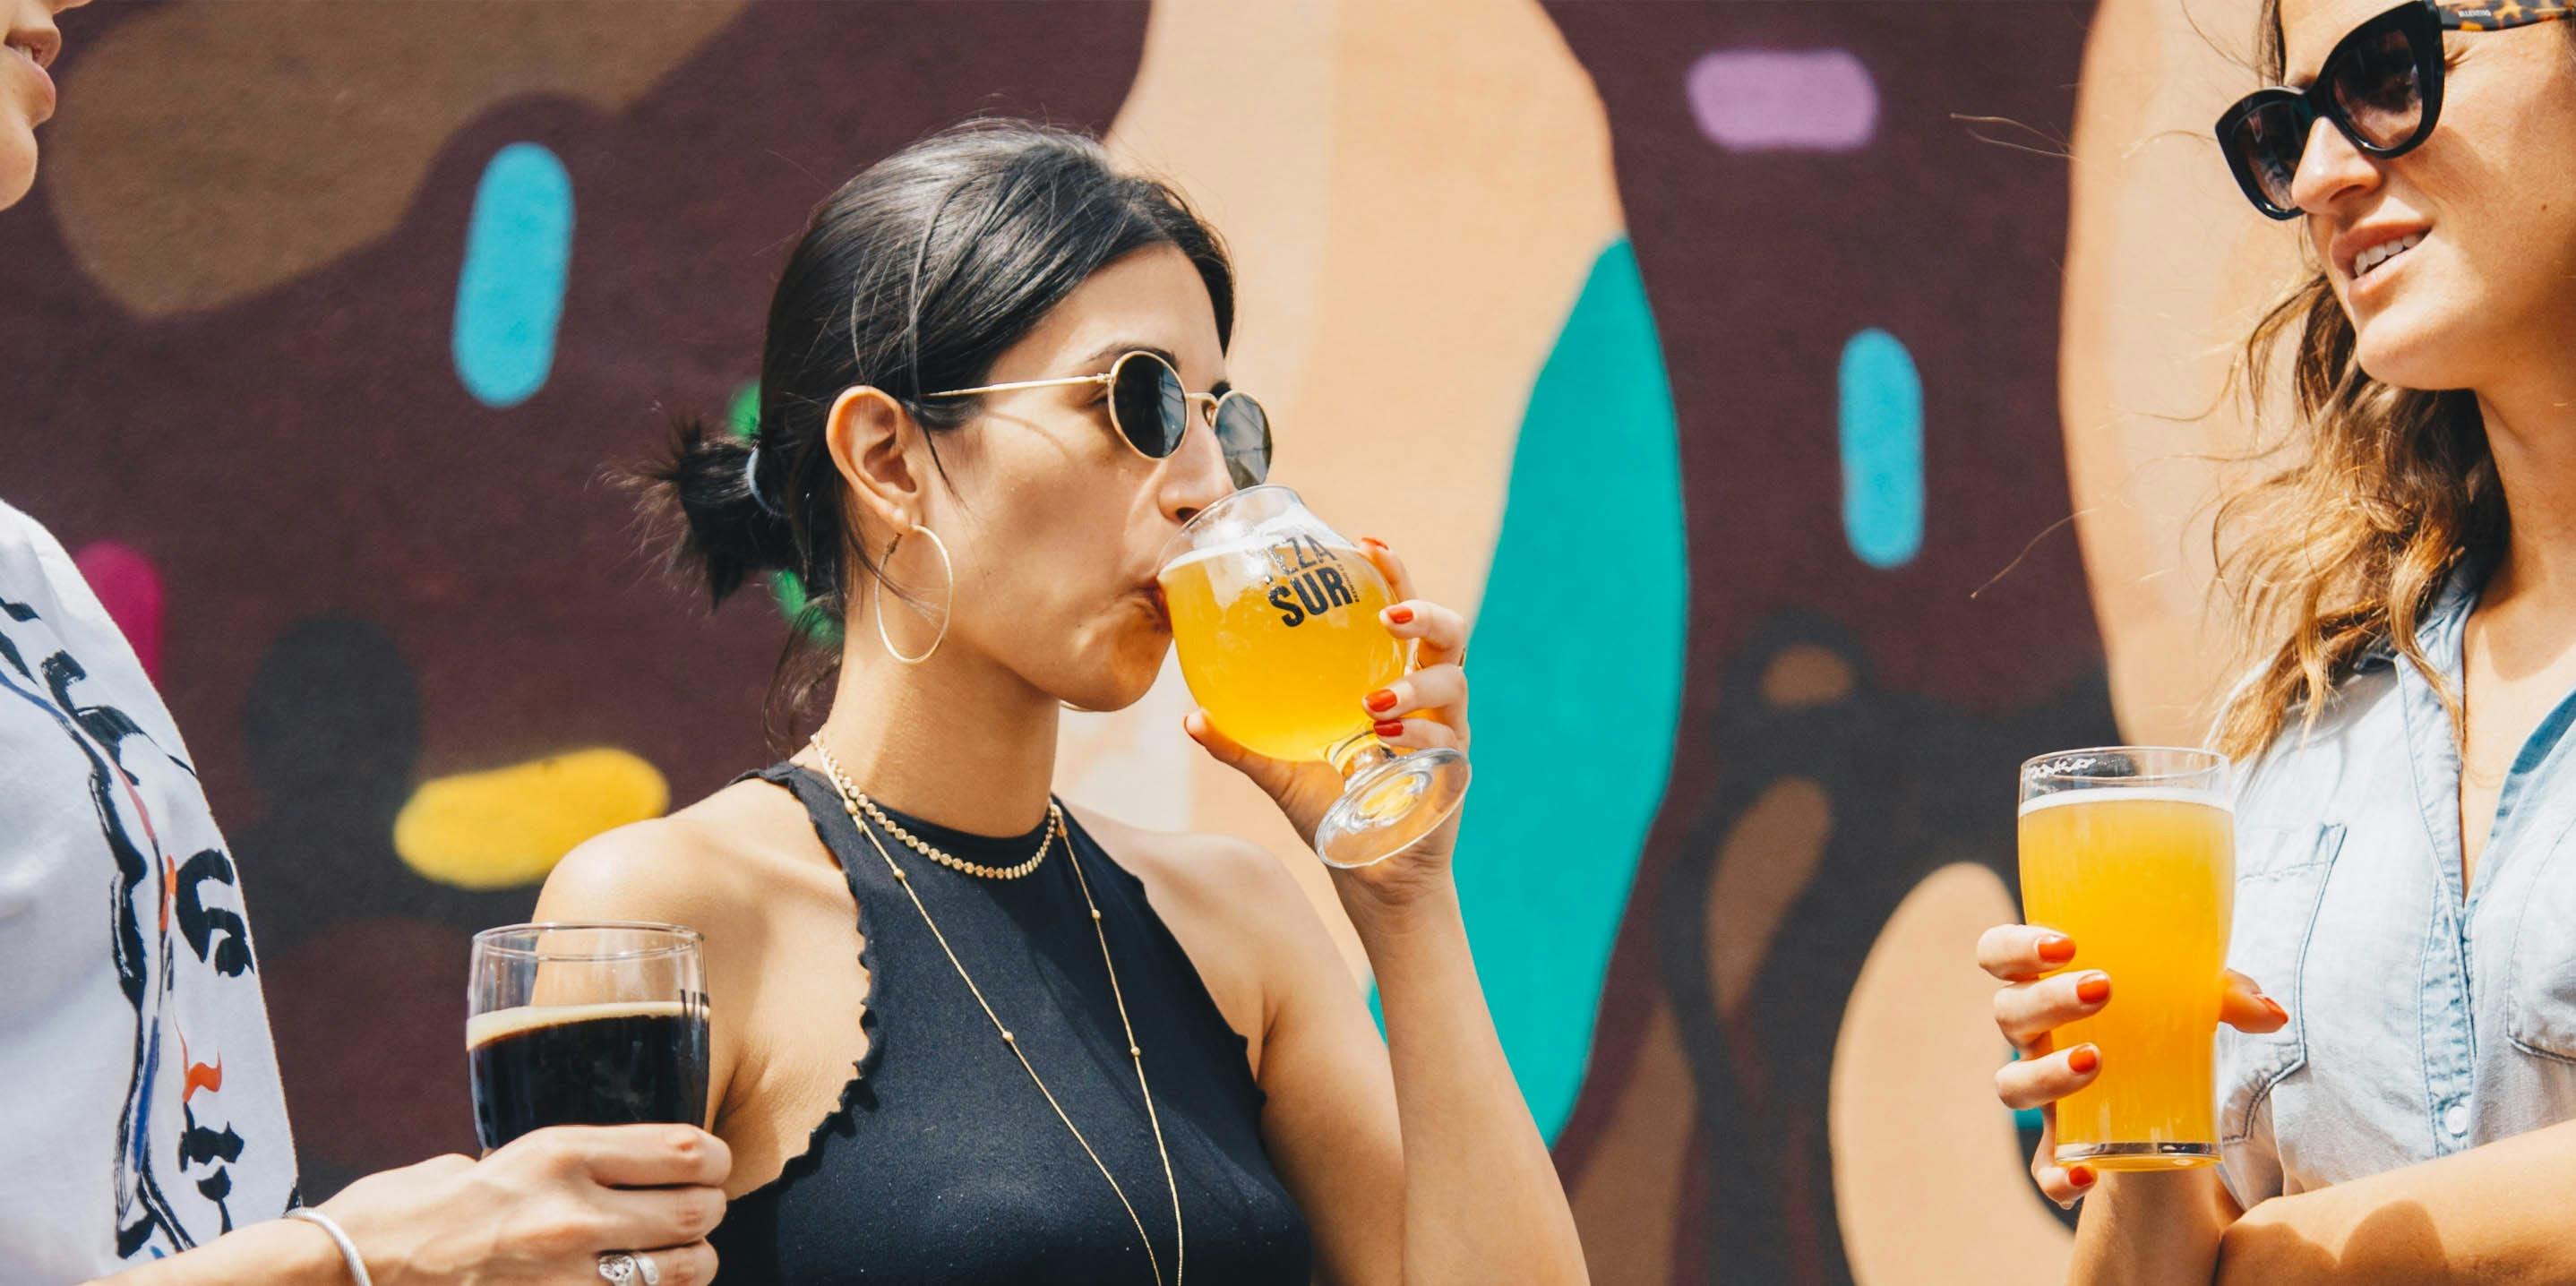 The Top 5 Cannabis Strains for Hangover Symptoms. Here, women are shown drinking beer